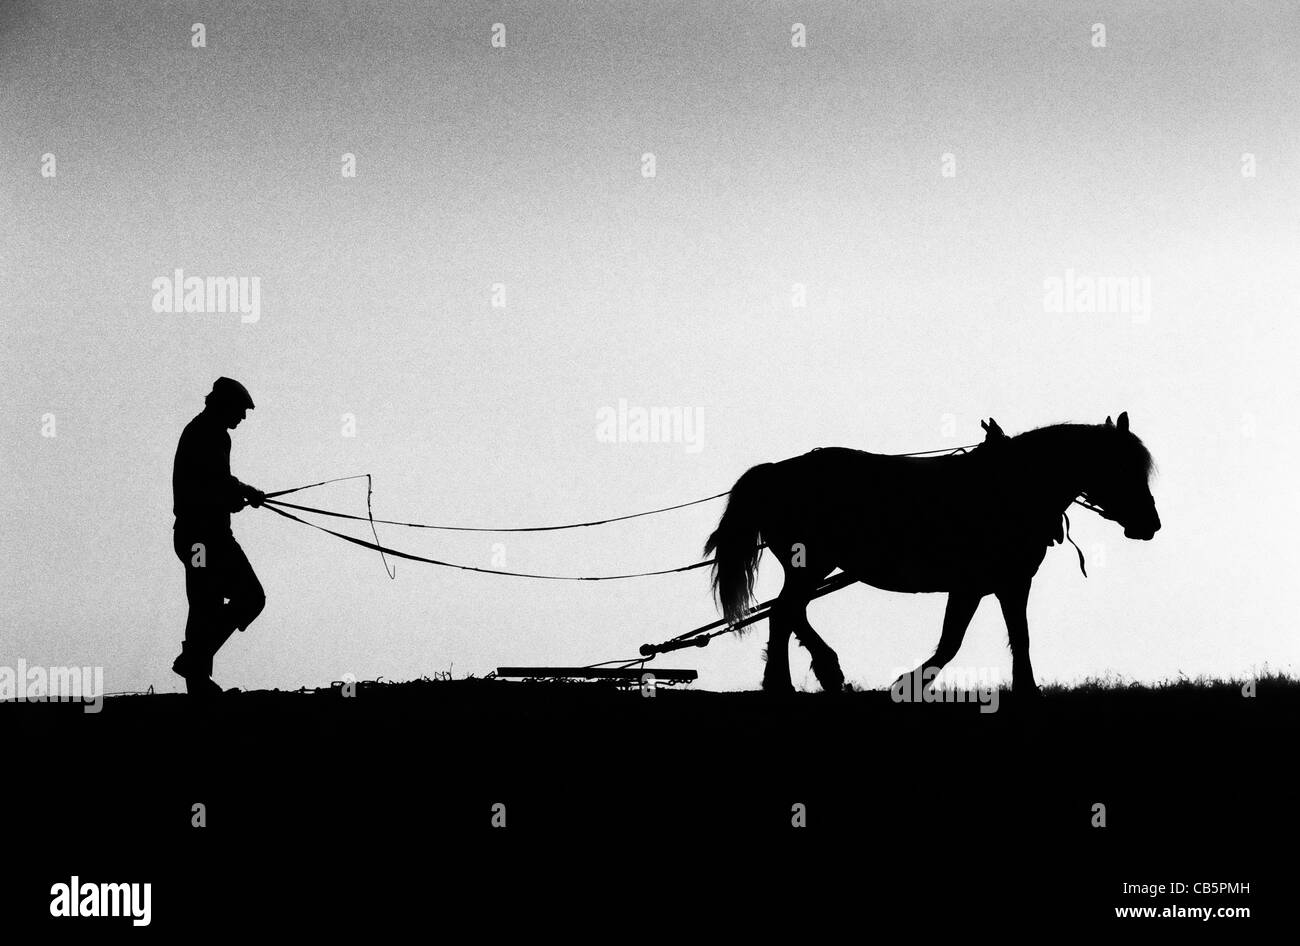 Hungary. Farmer wearing a cap driving his horse drawing a chain harrow in silhouette against a back light. Stock Photo